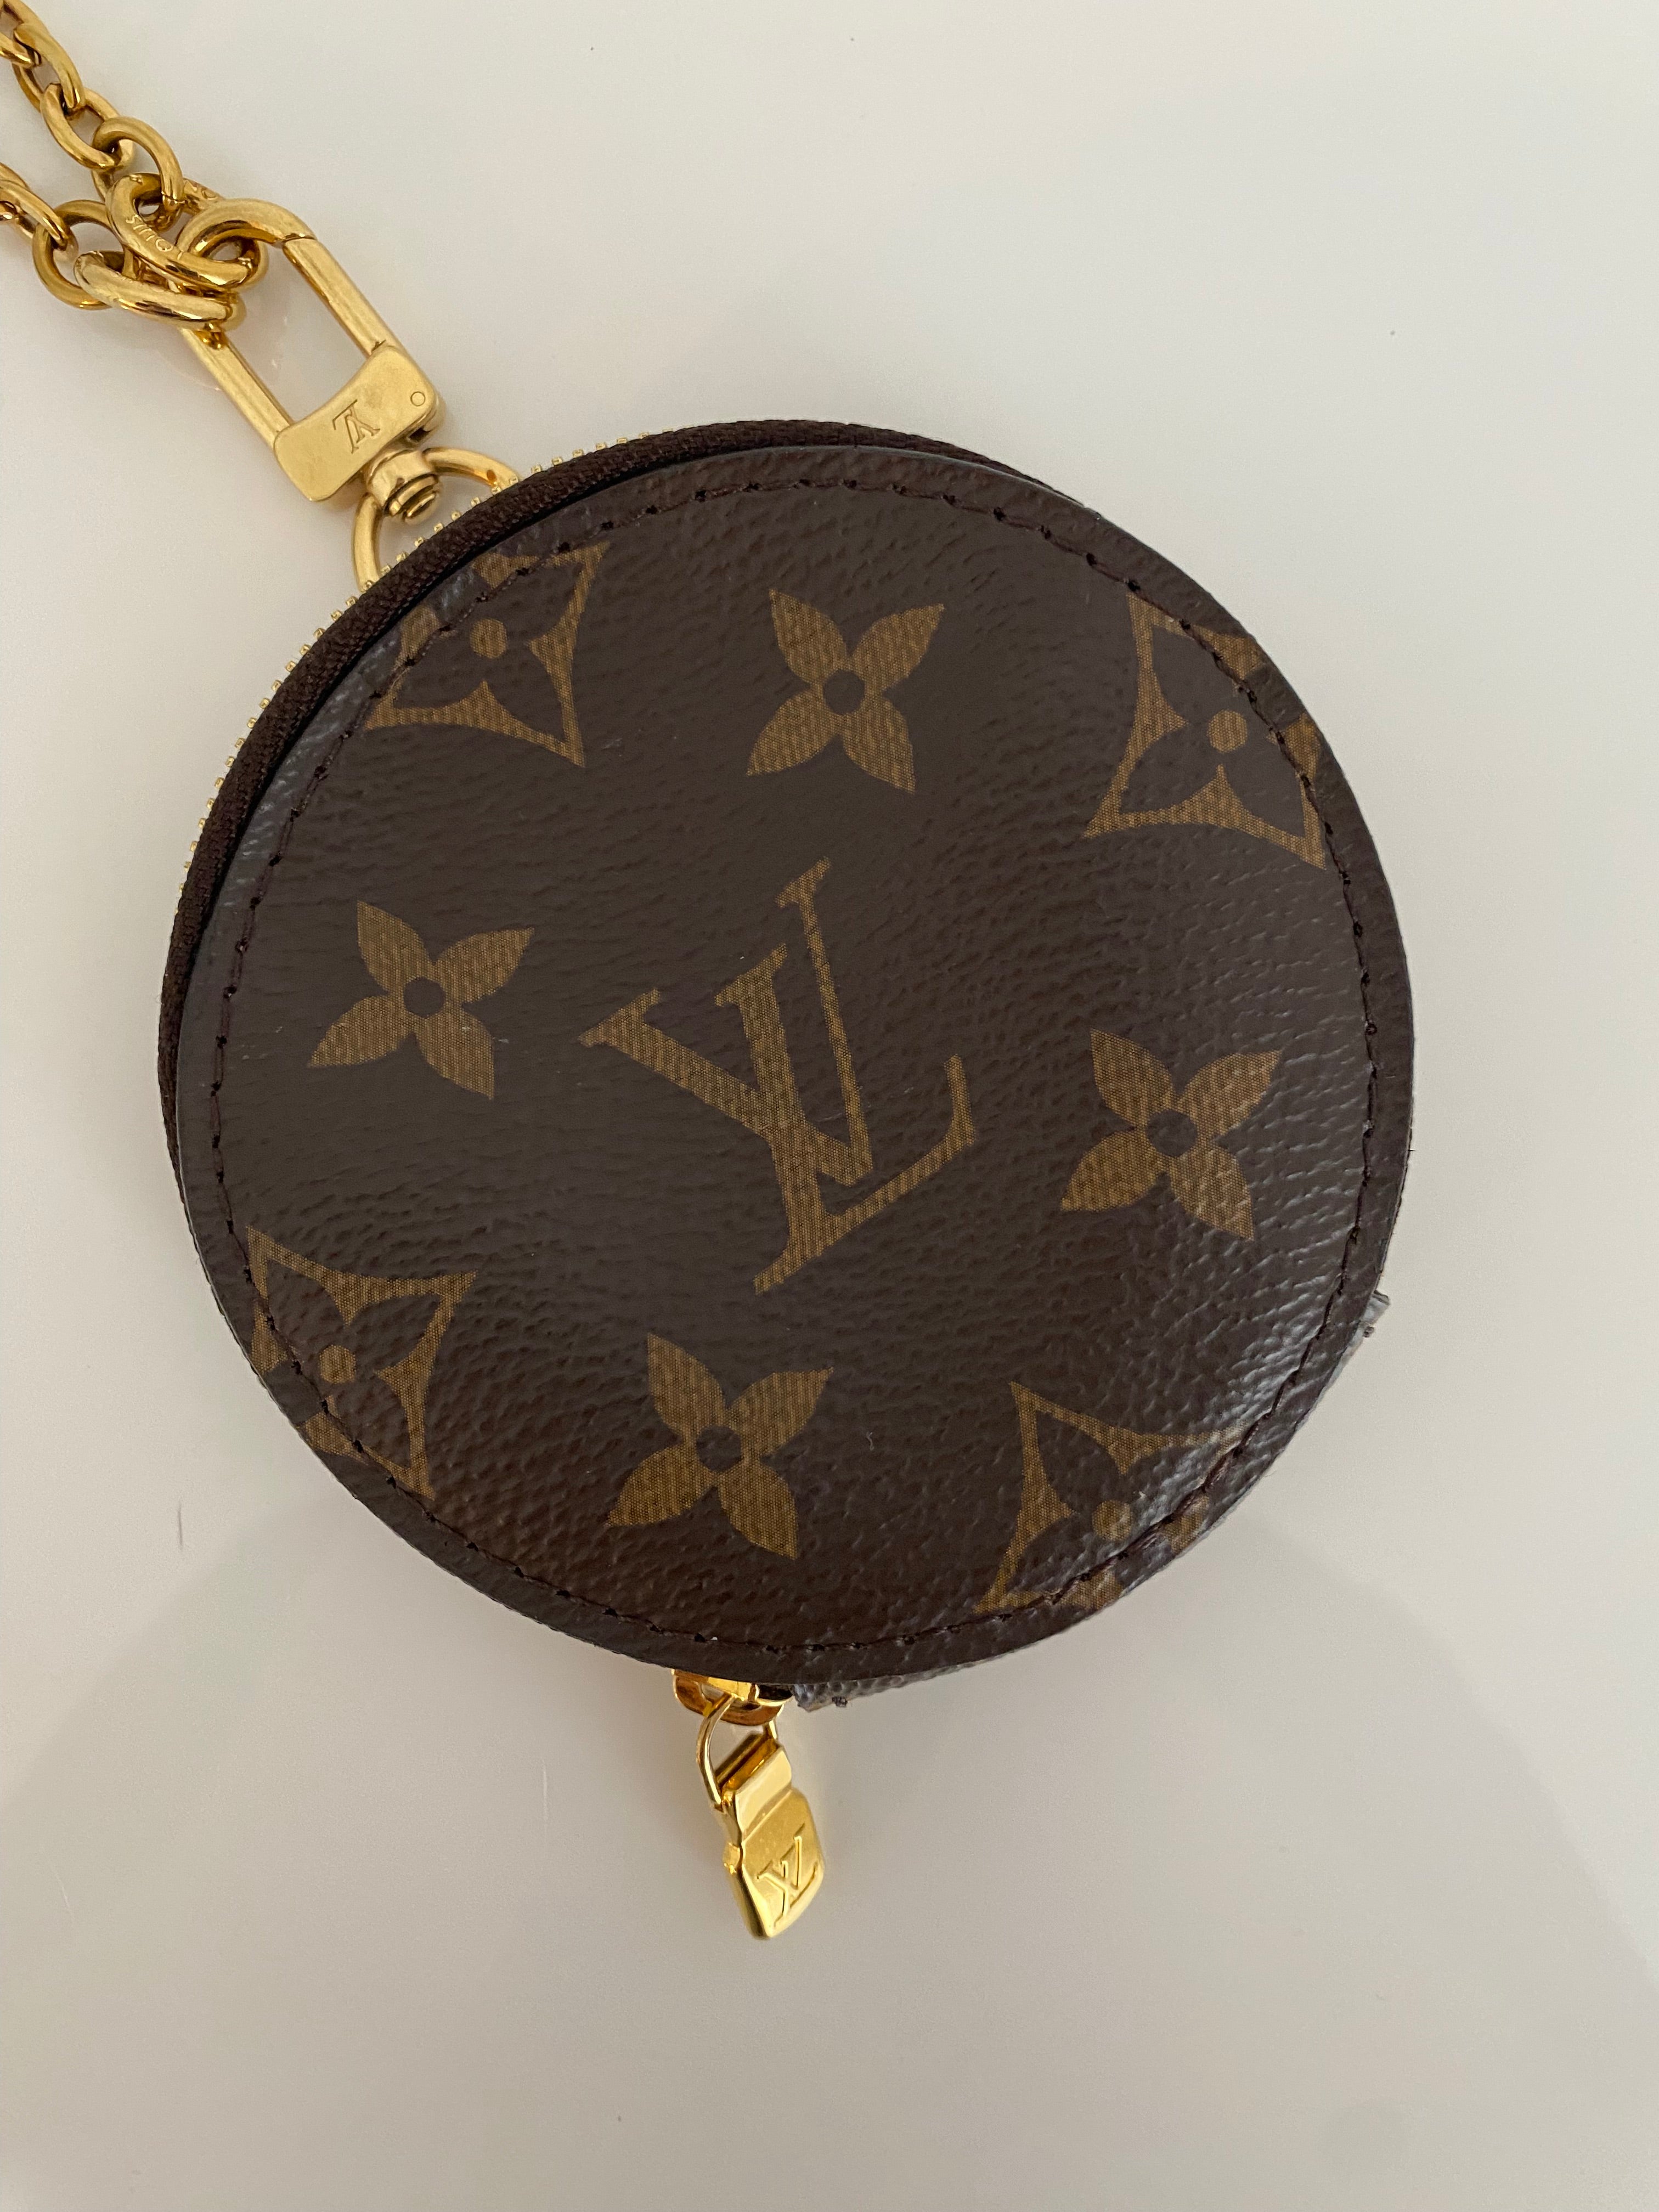 Introducing the New Louis Vuitton Pochette Bag That Is Everywhere